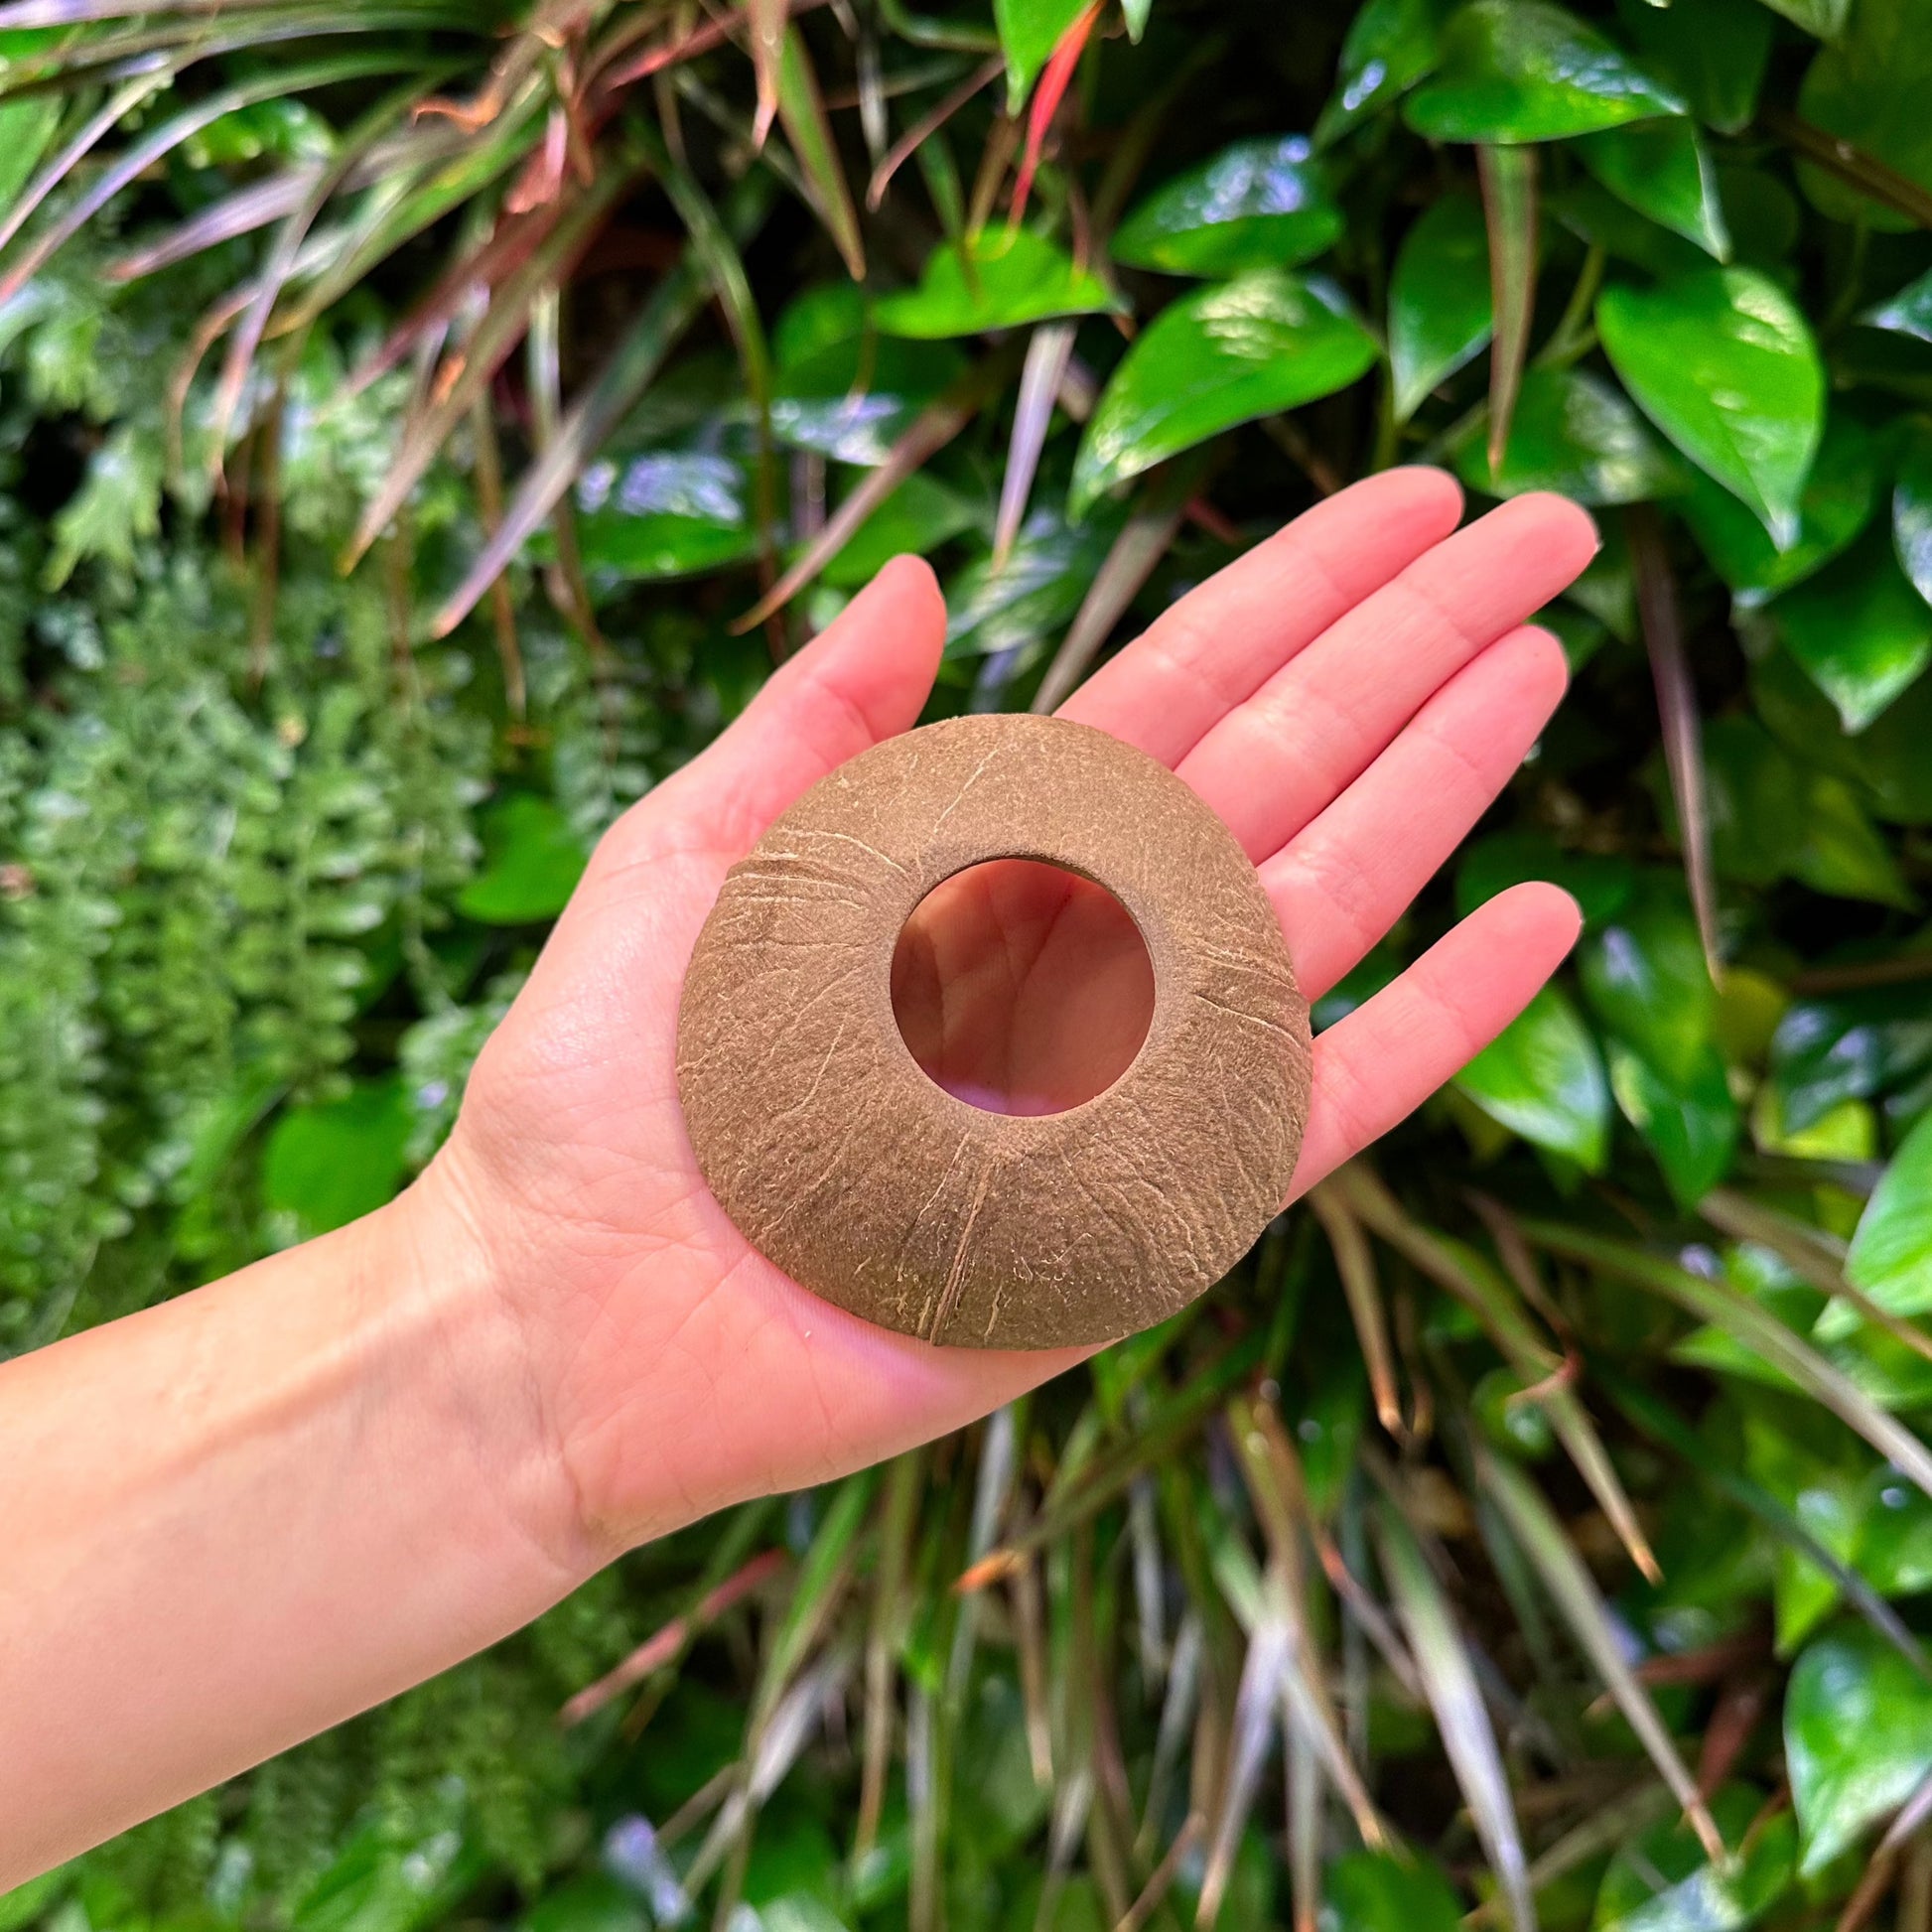 coconut shell disk in hand